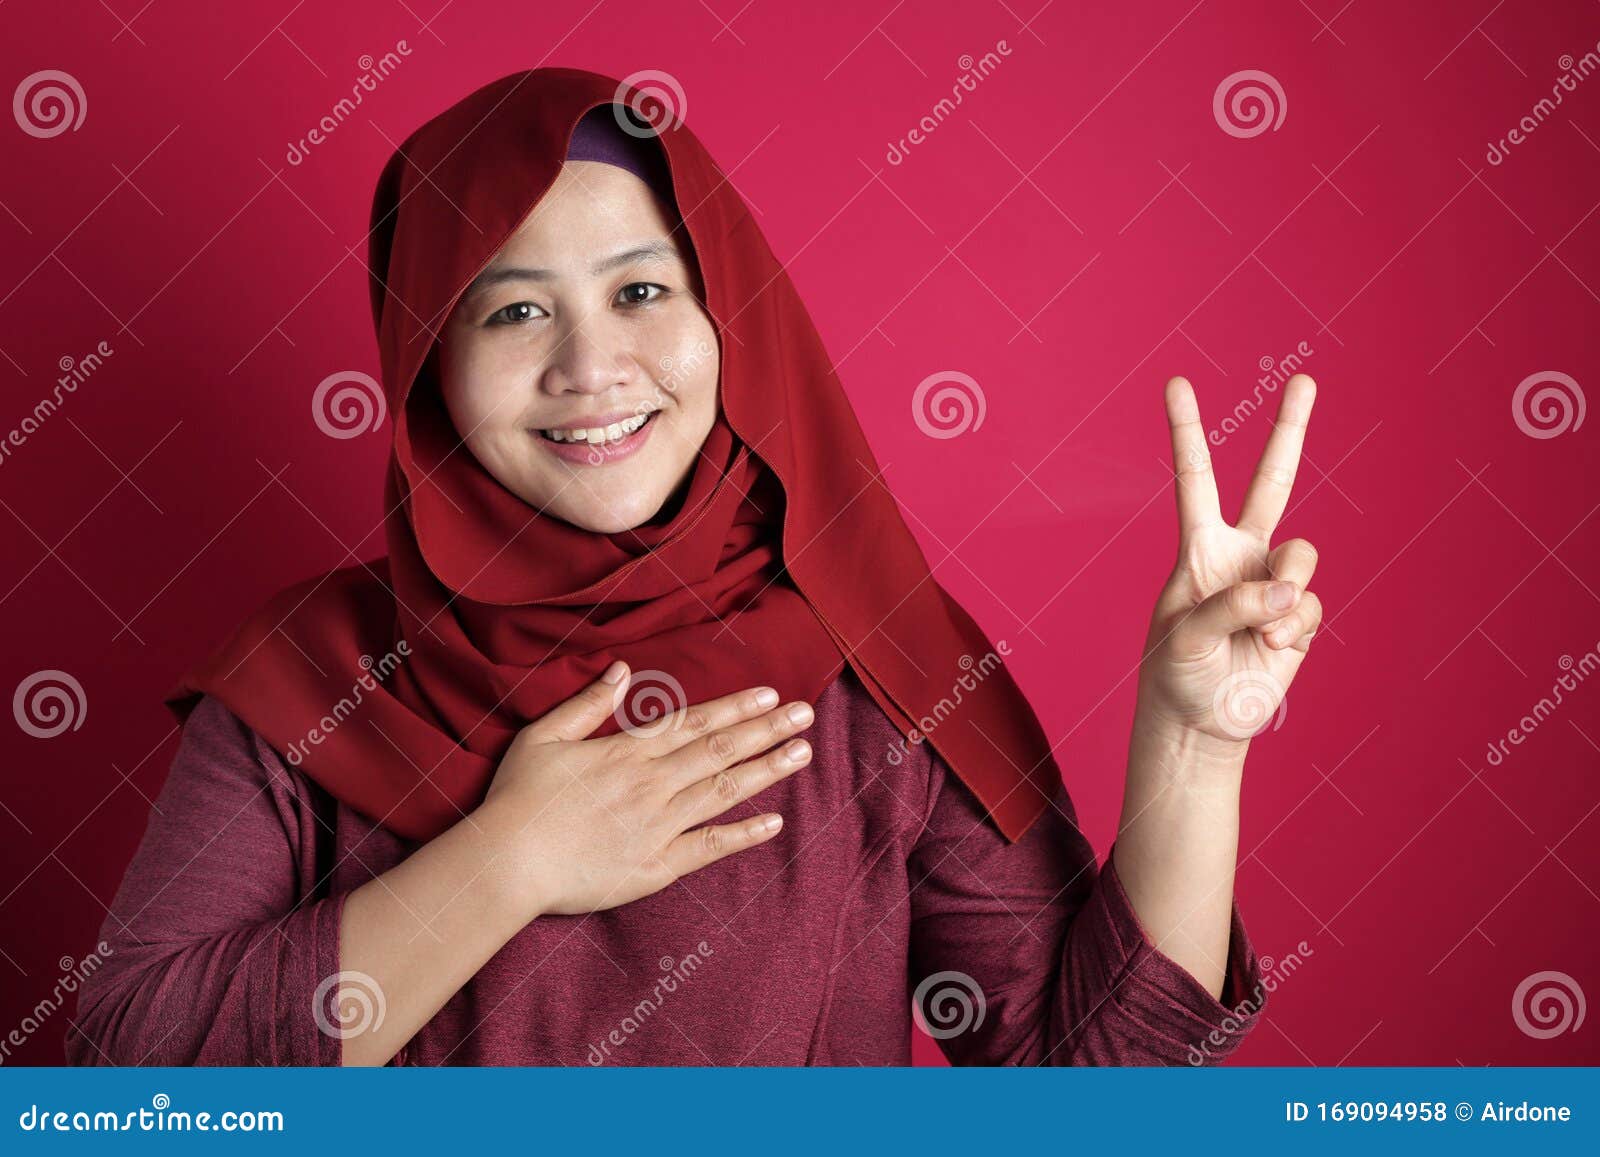 asian muslim woman making pledge gesture, hand on chest, making promise